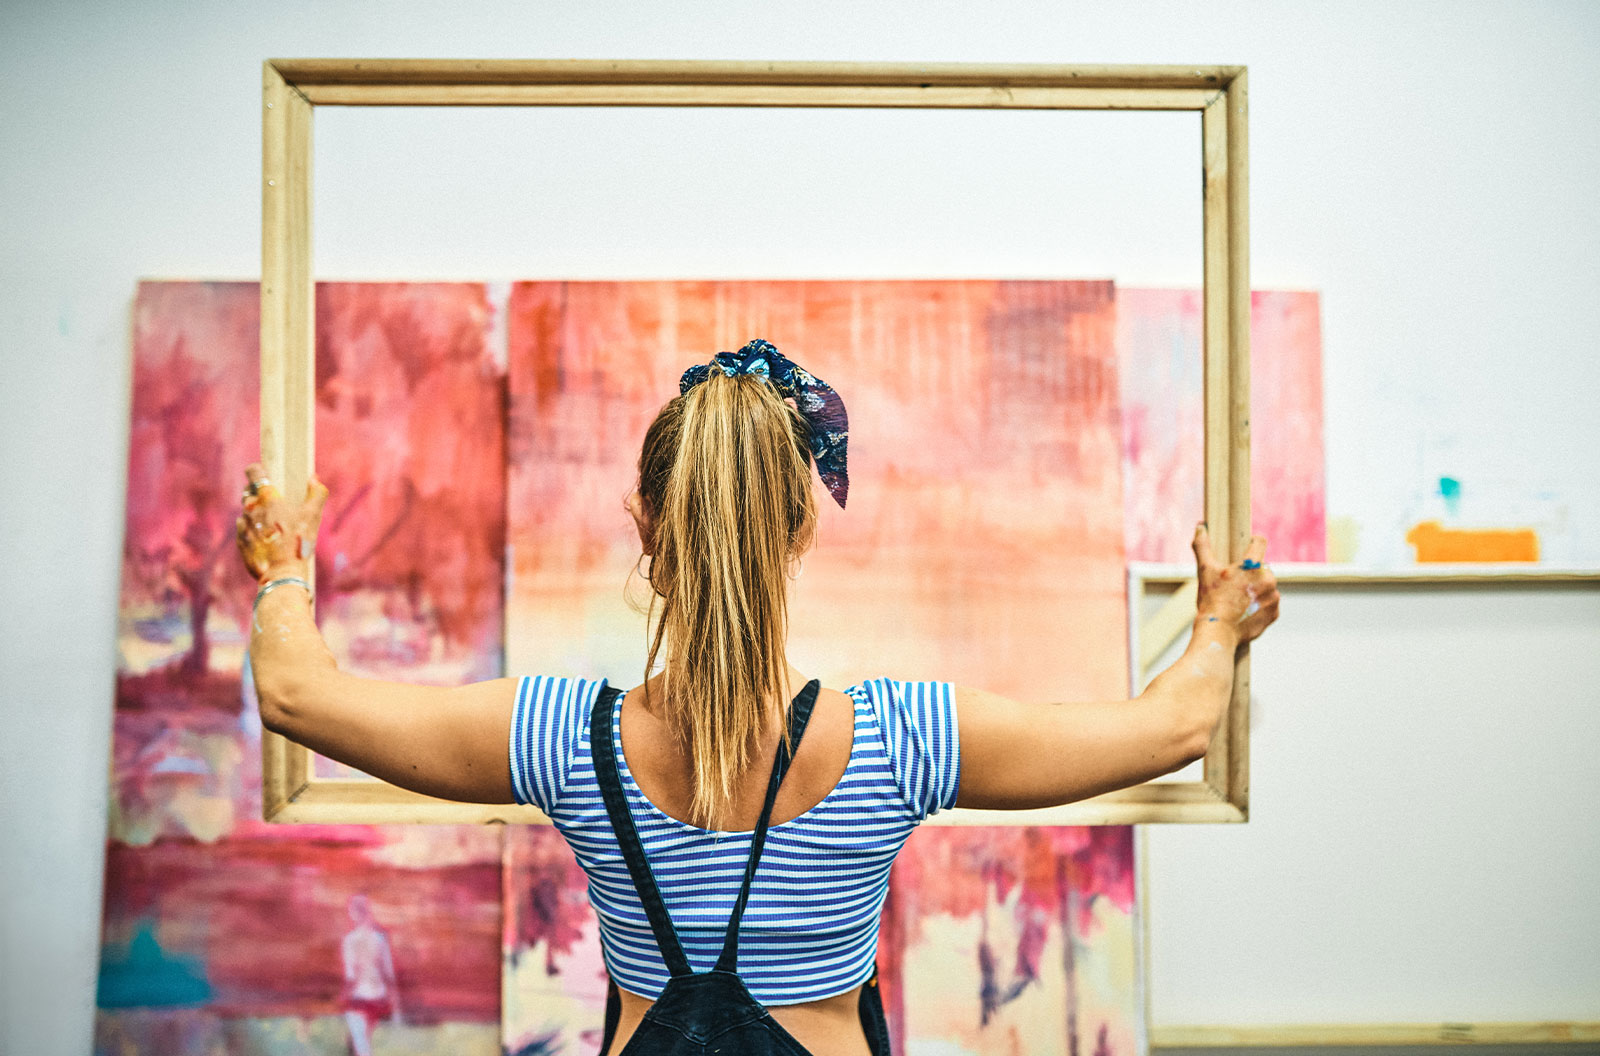 Rearview shot of a blonde woman standing alone and holding a wooden frame in her art studio